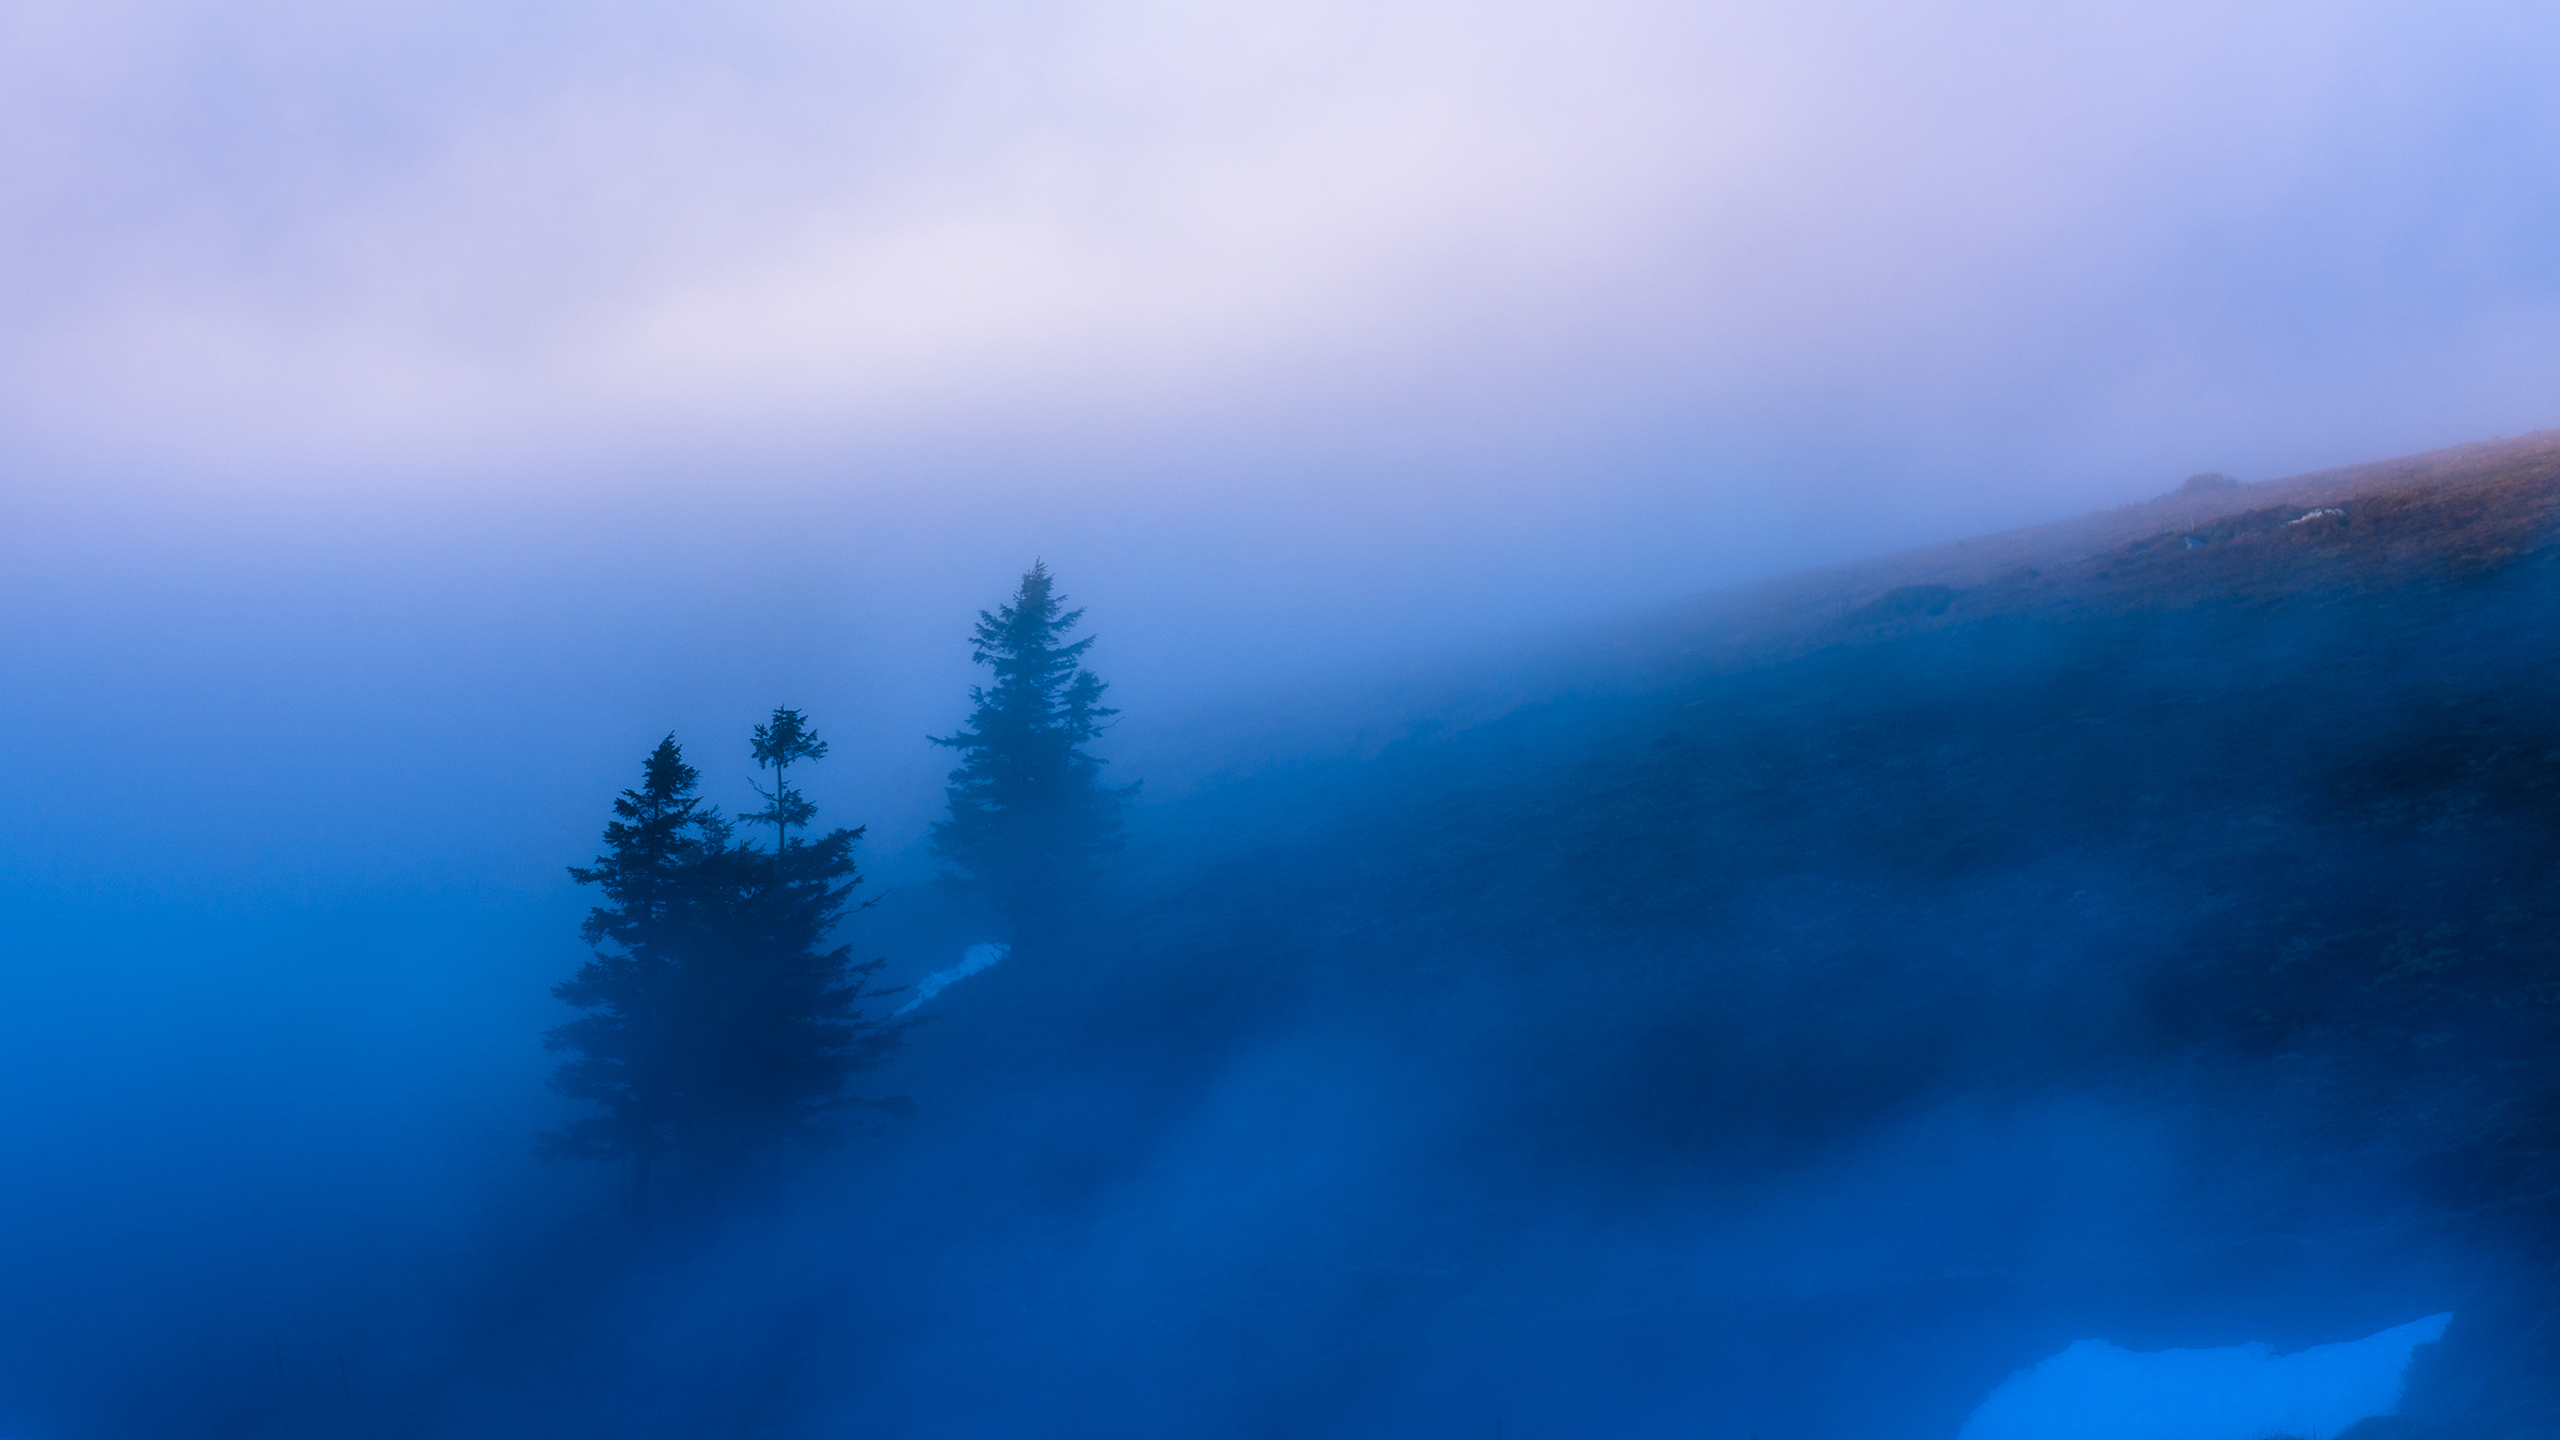 Foggy Morning Wallpapers | HD Wallpapers